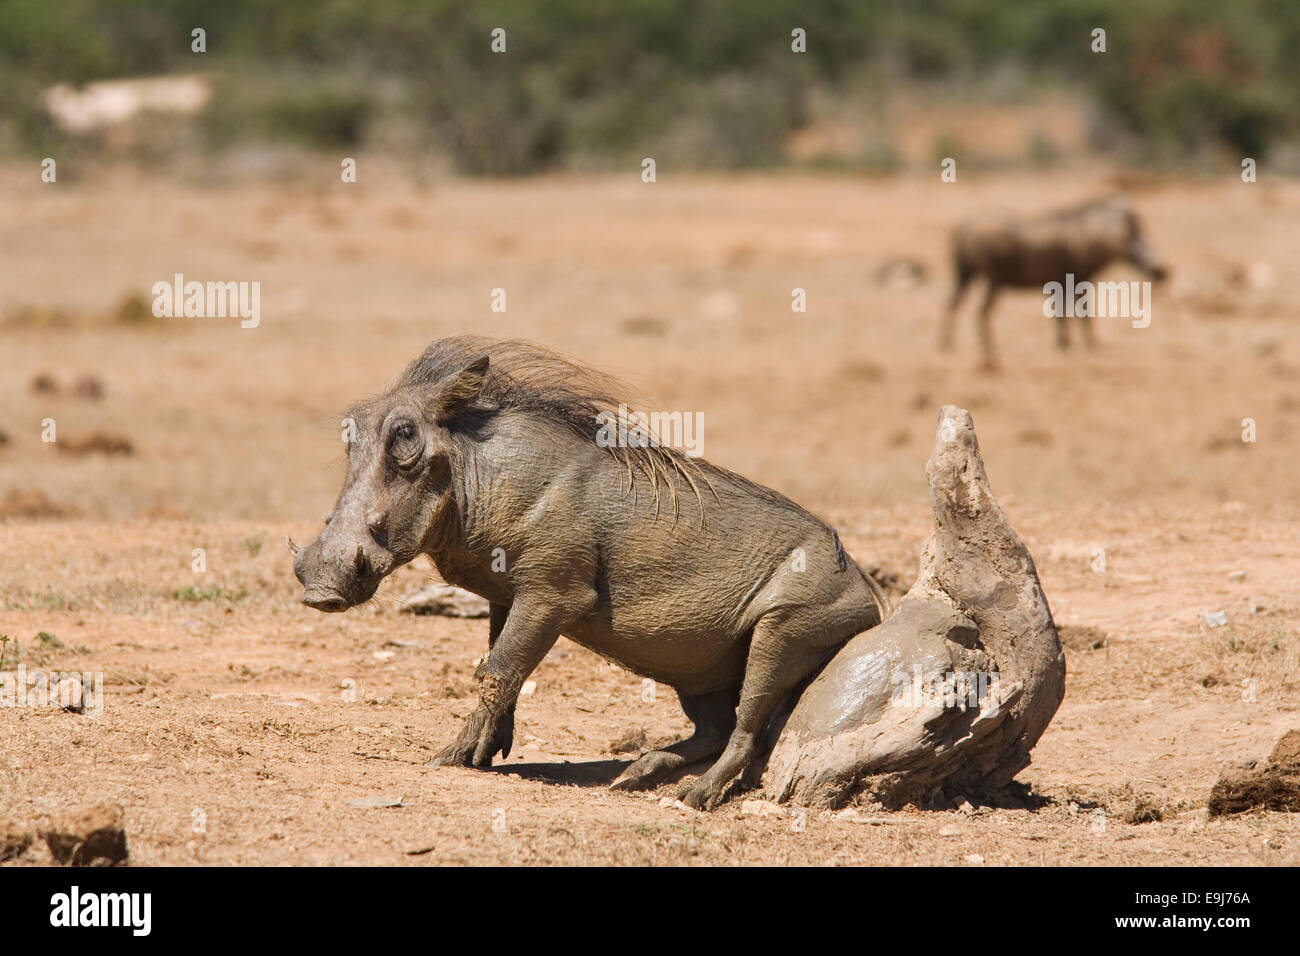 Warthog, Phacochoerus aethiopicus, at rubbing post, Addo national park, South Africa Stock Photo